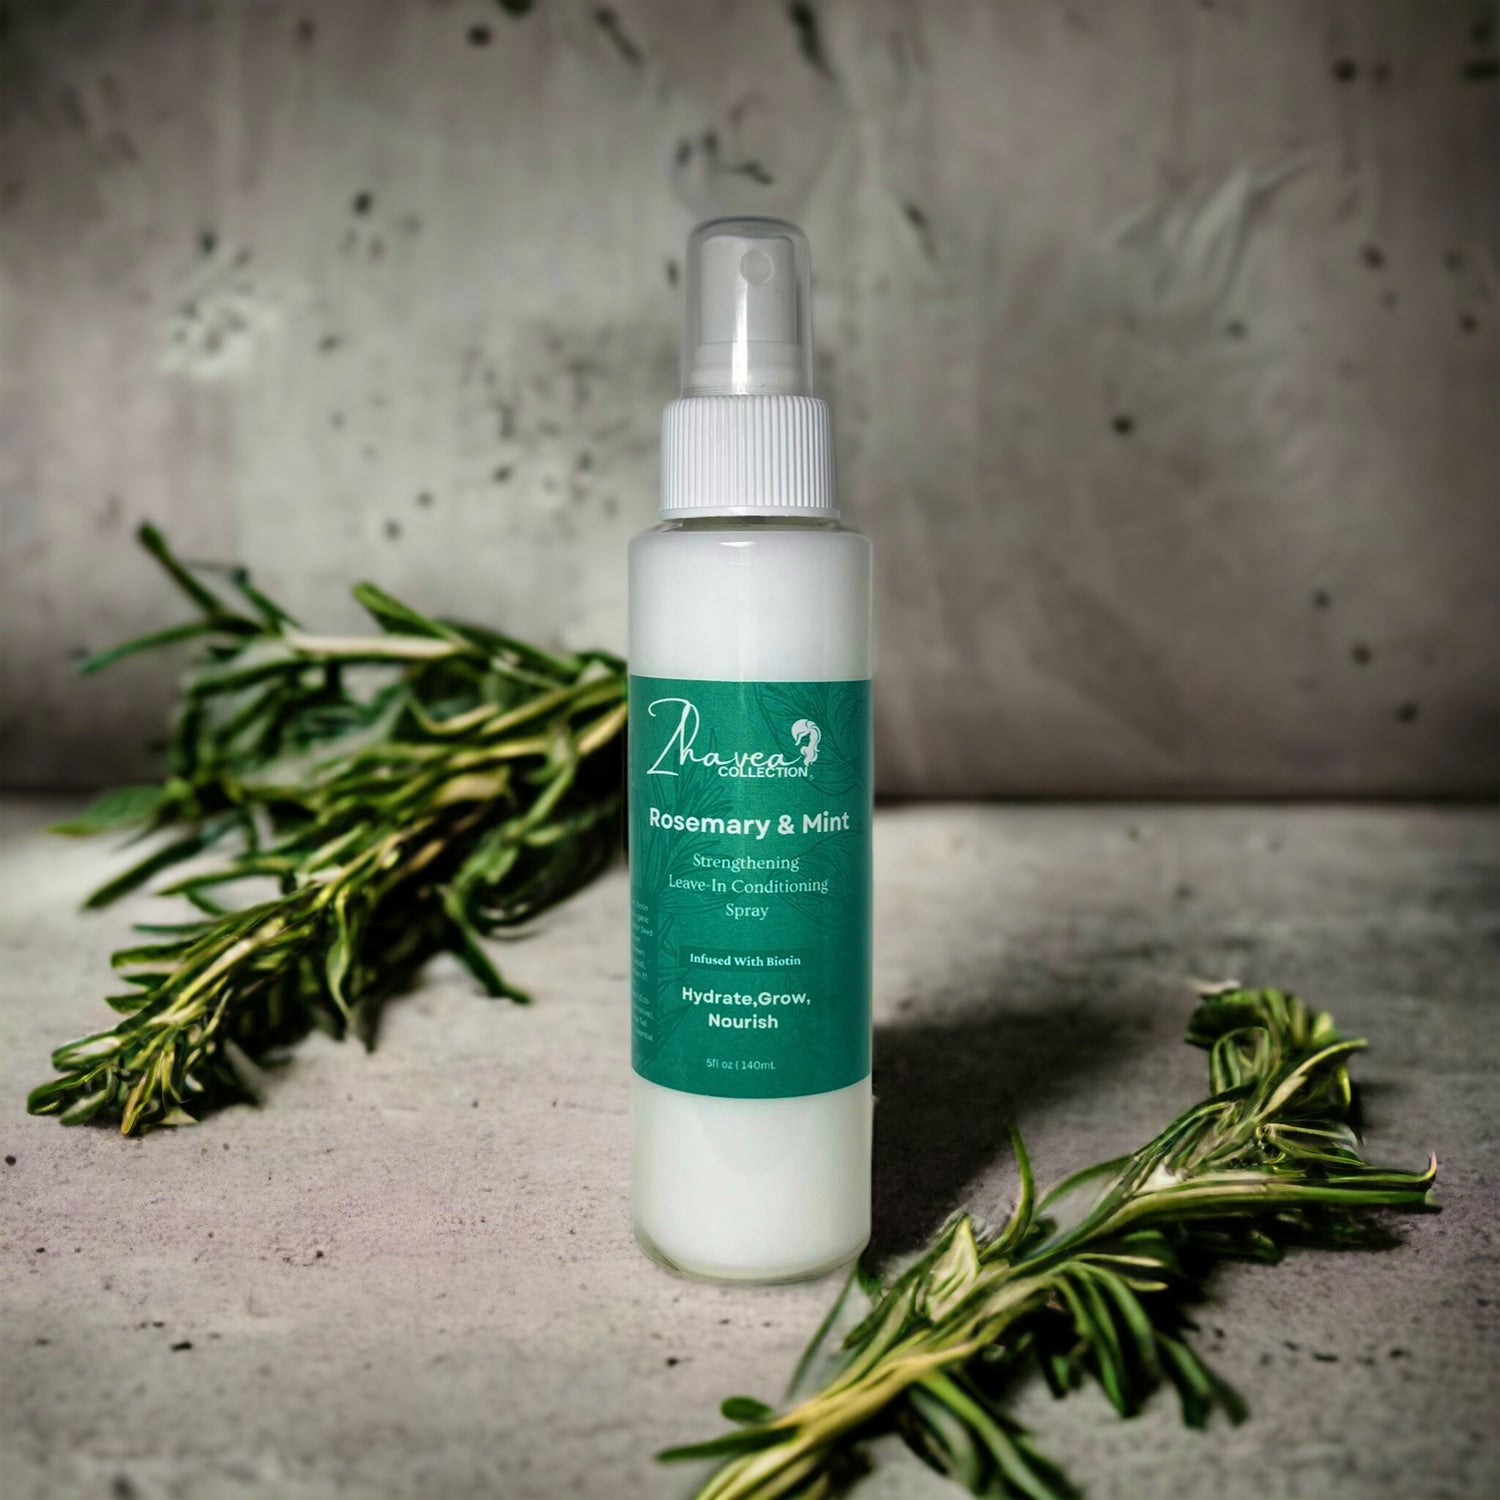 Rosemary &amp; Mint Strengthening Leave- In Conditioning Spray w/ Biotin - Zhavea collection